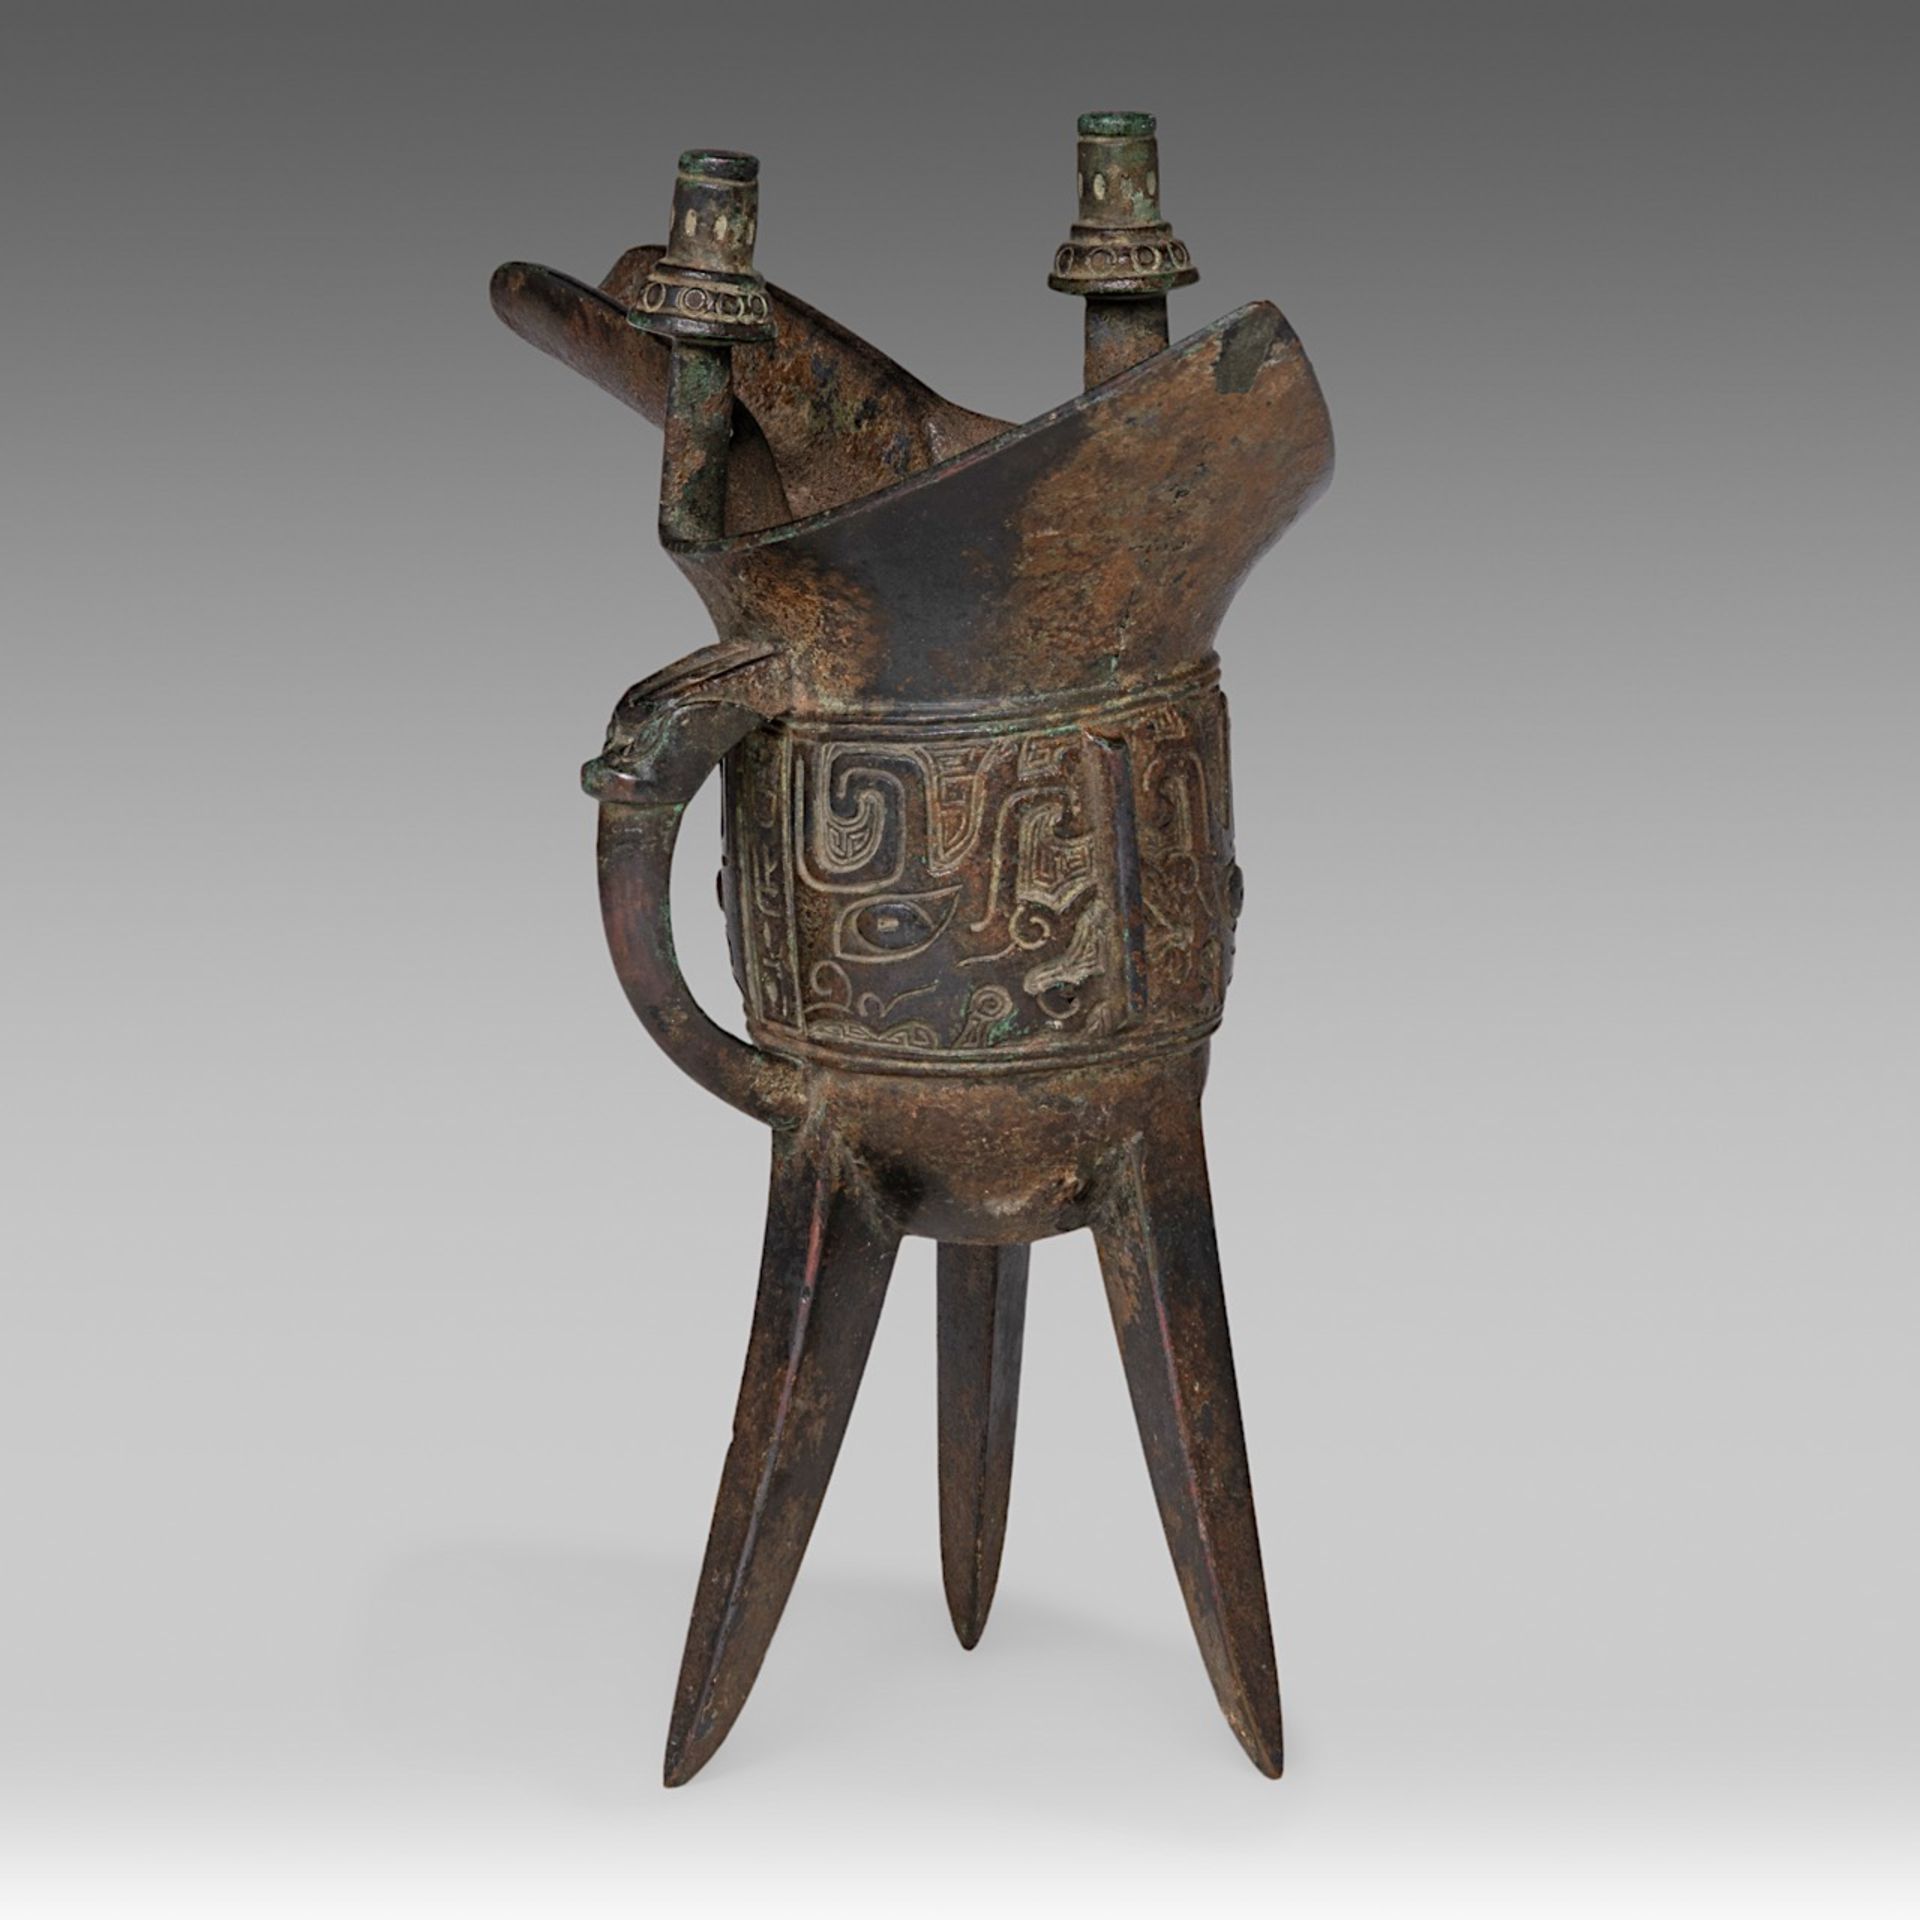 A Chinese archaistic ritual bronze 'Jue' vessel, Ming dynasty, H 19,2 - L 17,3 cm - Image 4 of 7